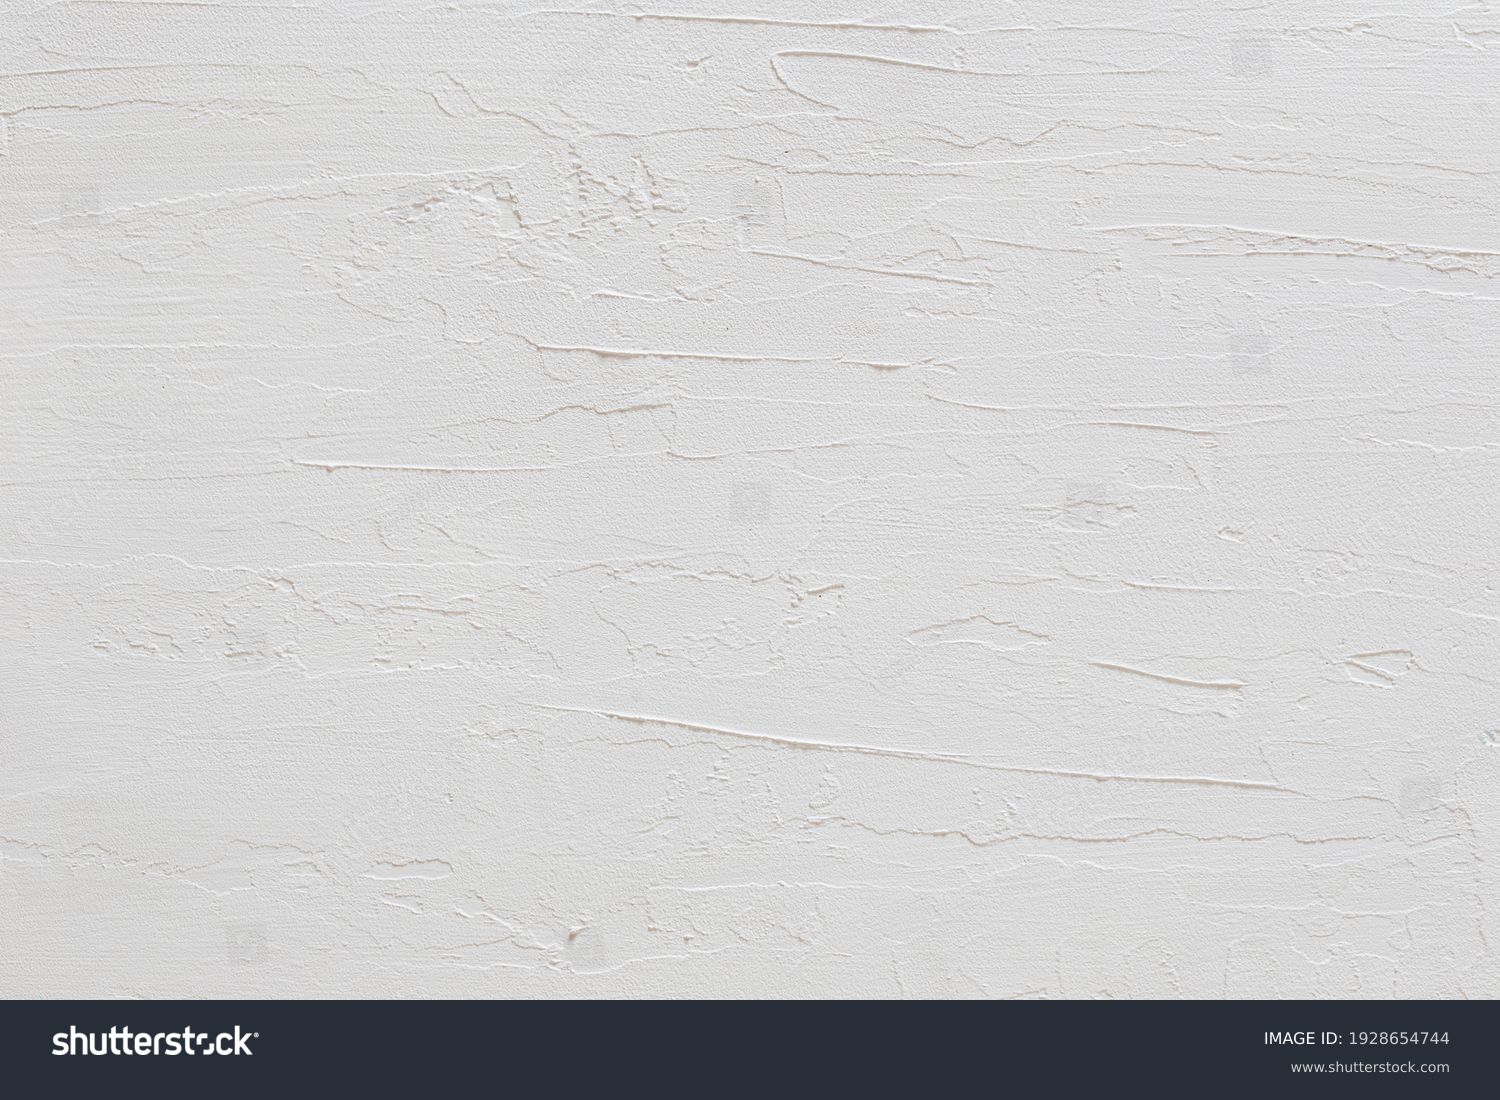 close-up view of a white stucco wall texture #1928654744